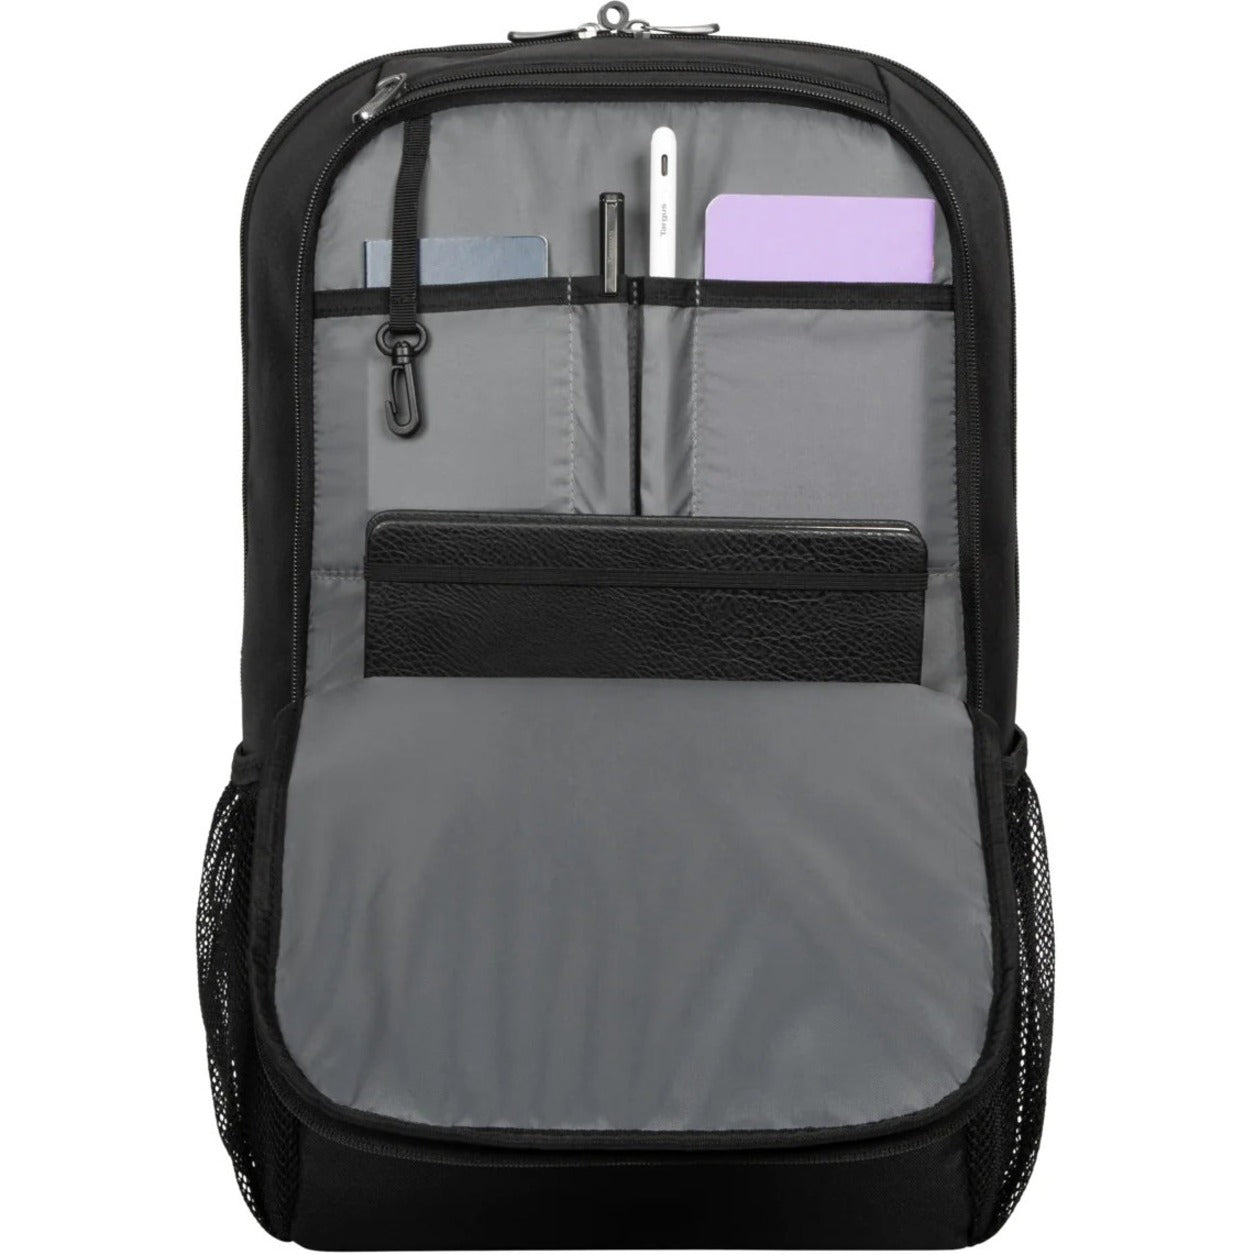 Targus Classic TBB944GL Carrying Case (Backpack) for 17" to 17.3" Notebook Smartphone Accessories - Black